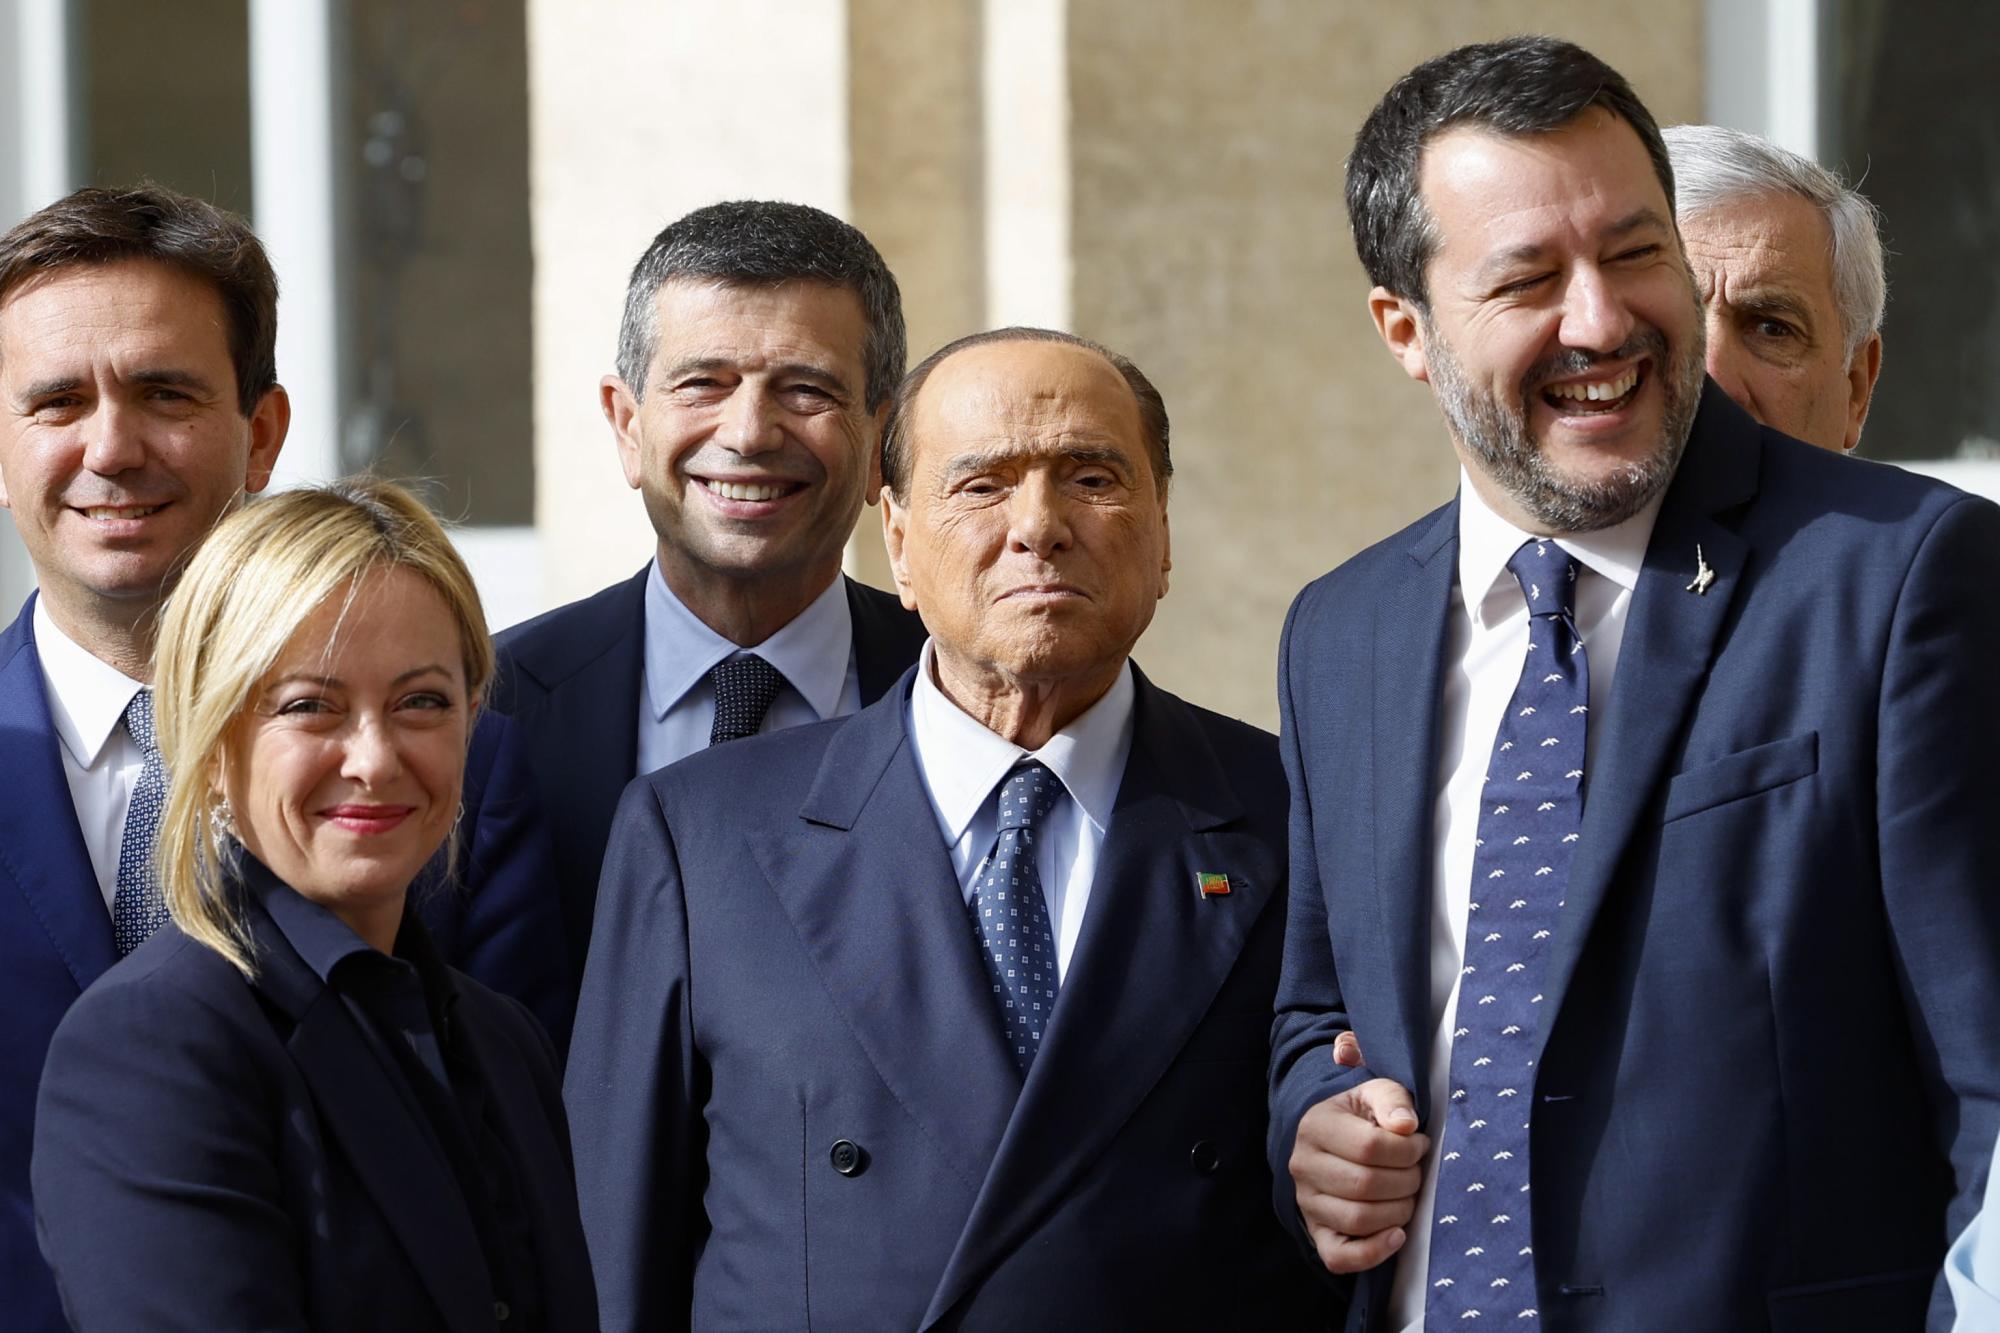 Italy holds political consultations to form new government